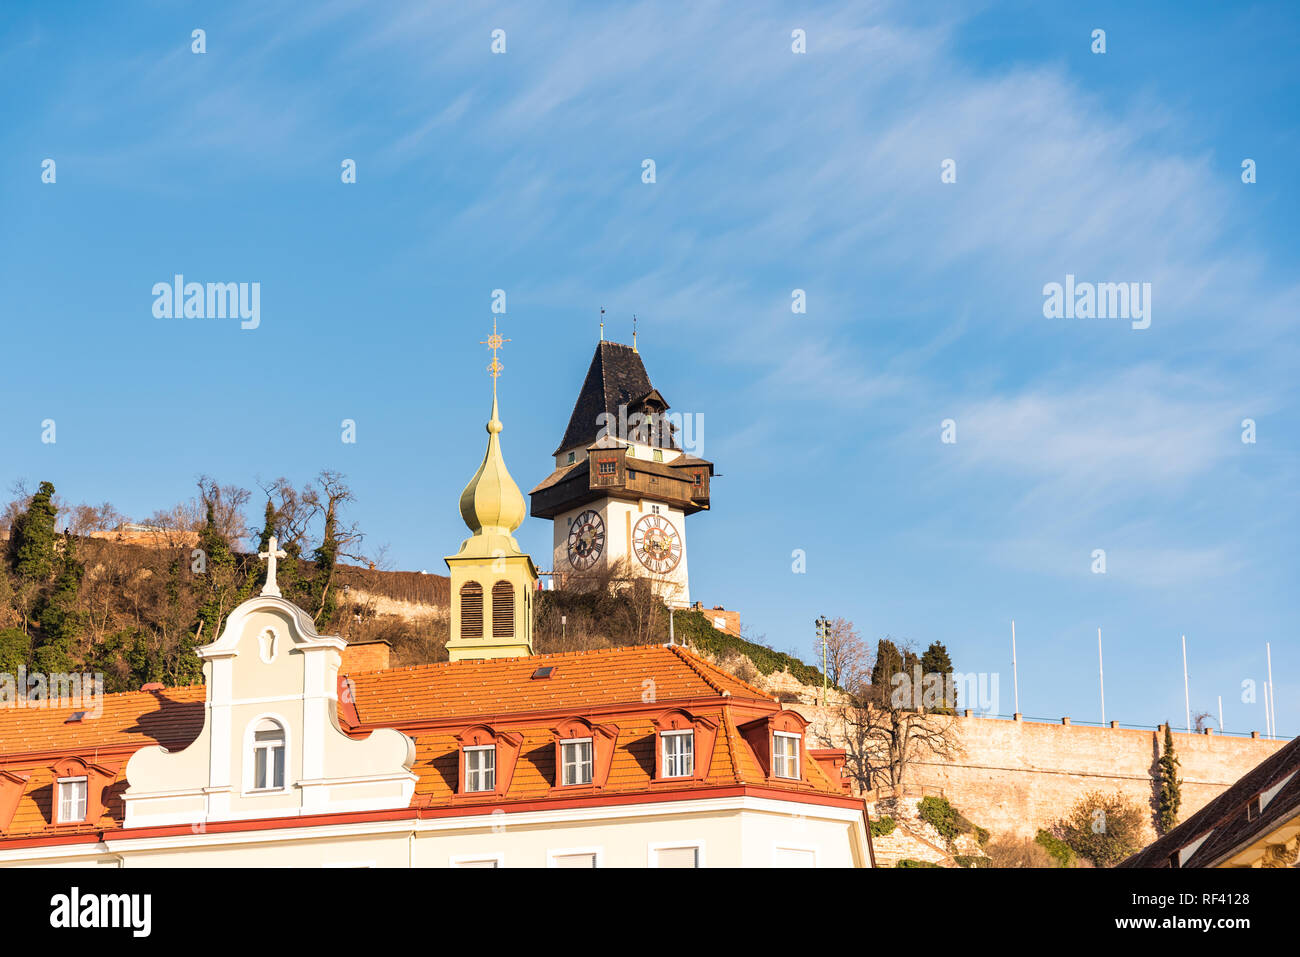 Graz, Styria / Austria - 20.01.2019: View at Schlossberg hill with fortress and clock-tower Uhrturm. Travel destination. Stock Photo